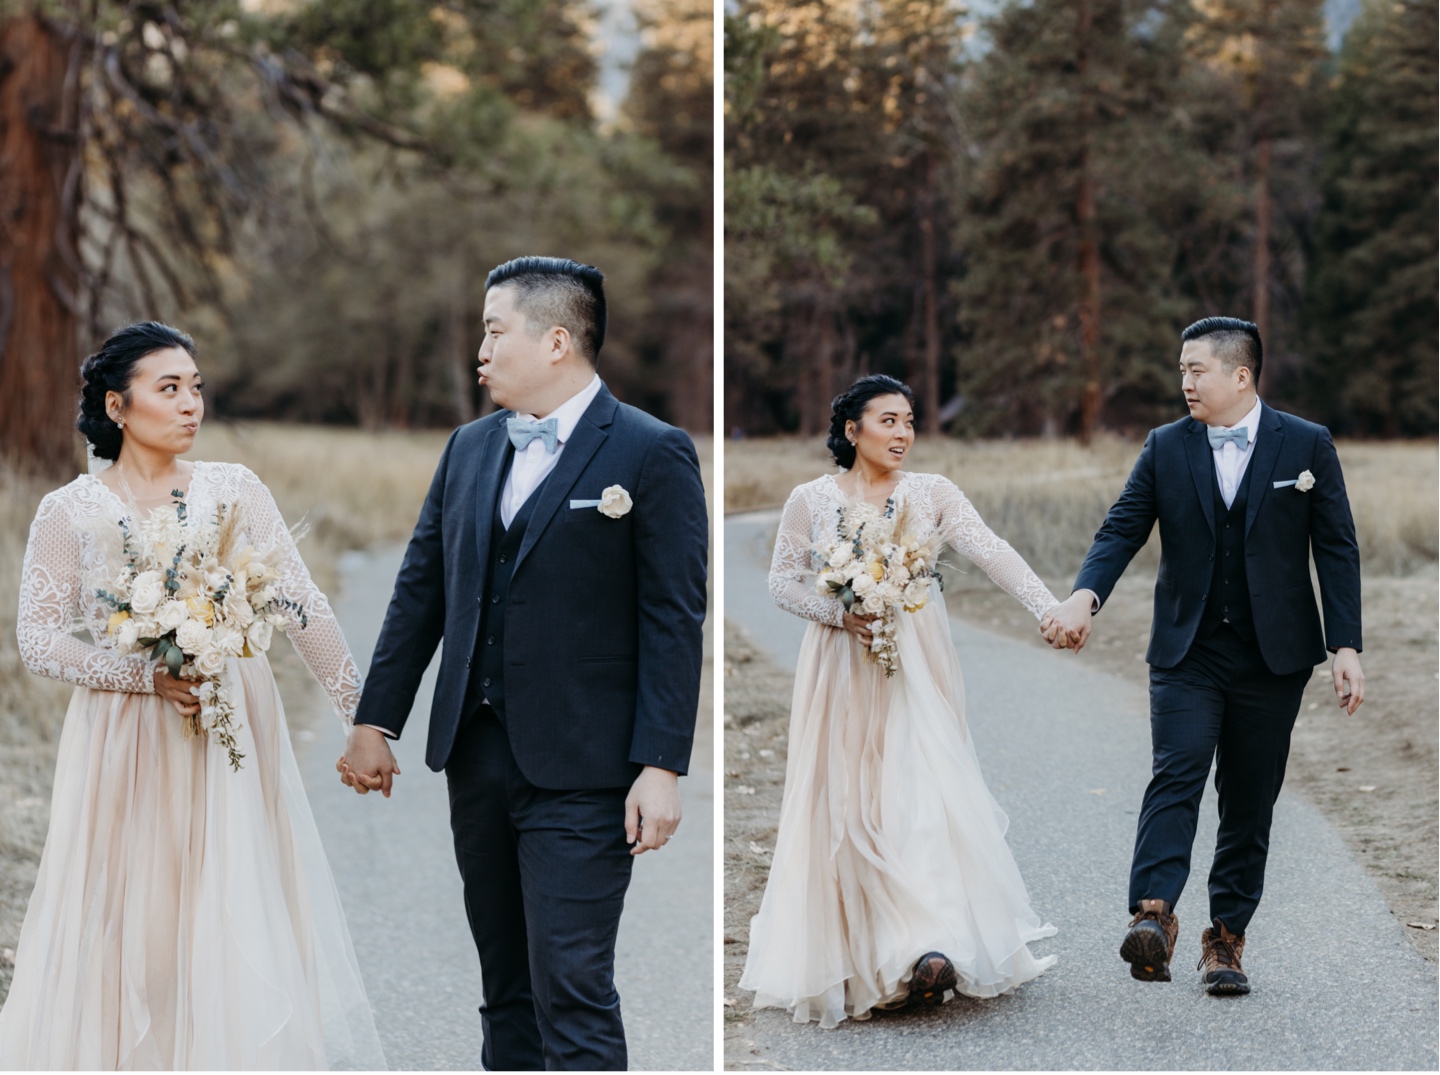 Bride and groom make funny faces at each other as the walk hand in hand down a Yosemite hiking trail.